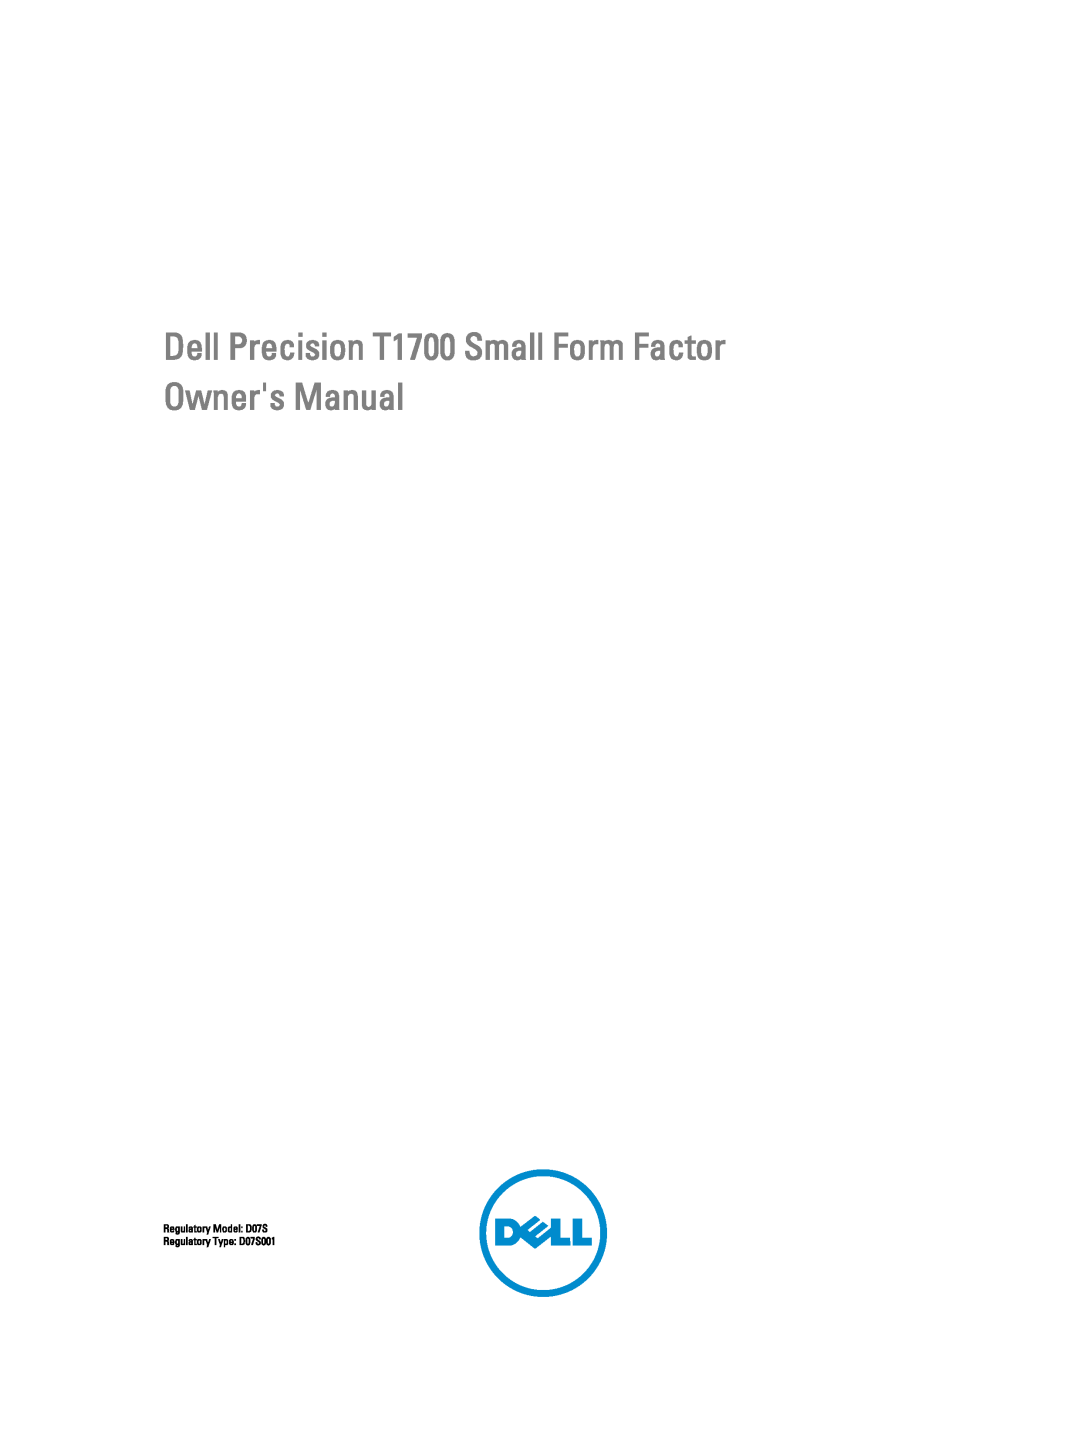 Dell owner manual Dell Precision T1700 Small Form Factor Owners Manual, Regulatory Model D07S Regulatory Type D07S001 